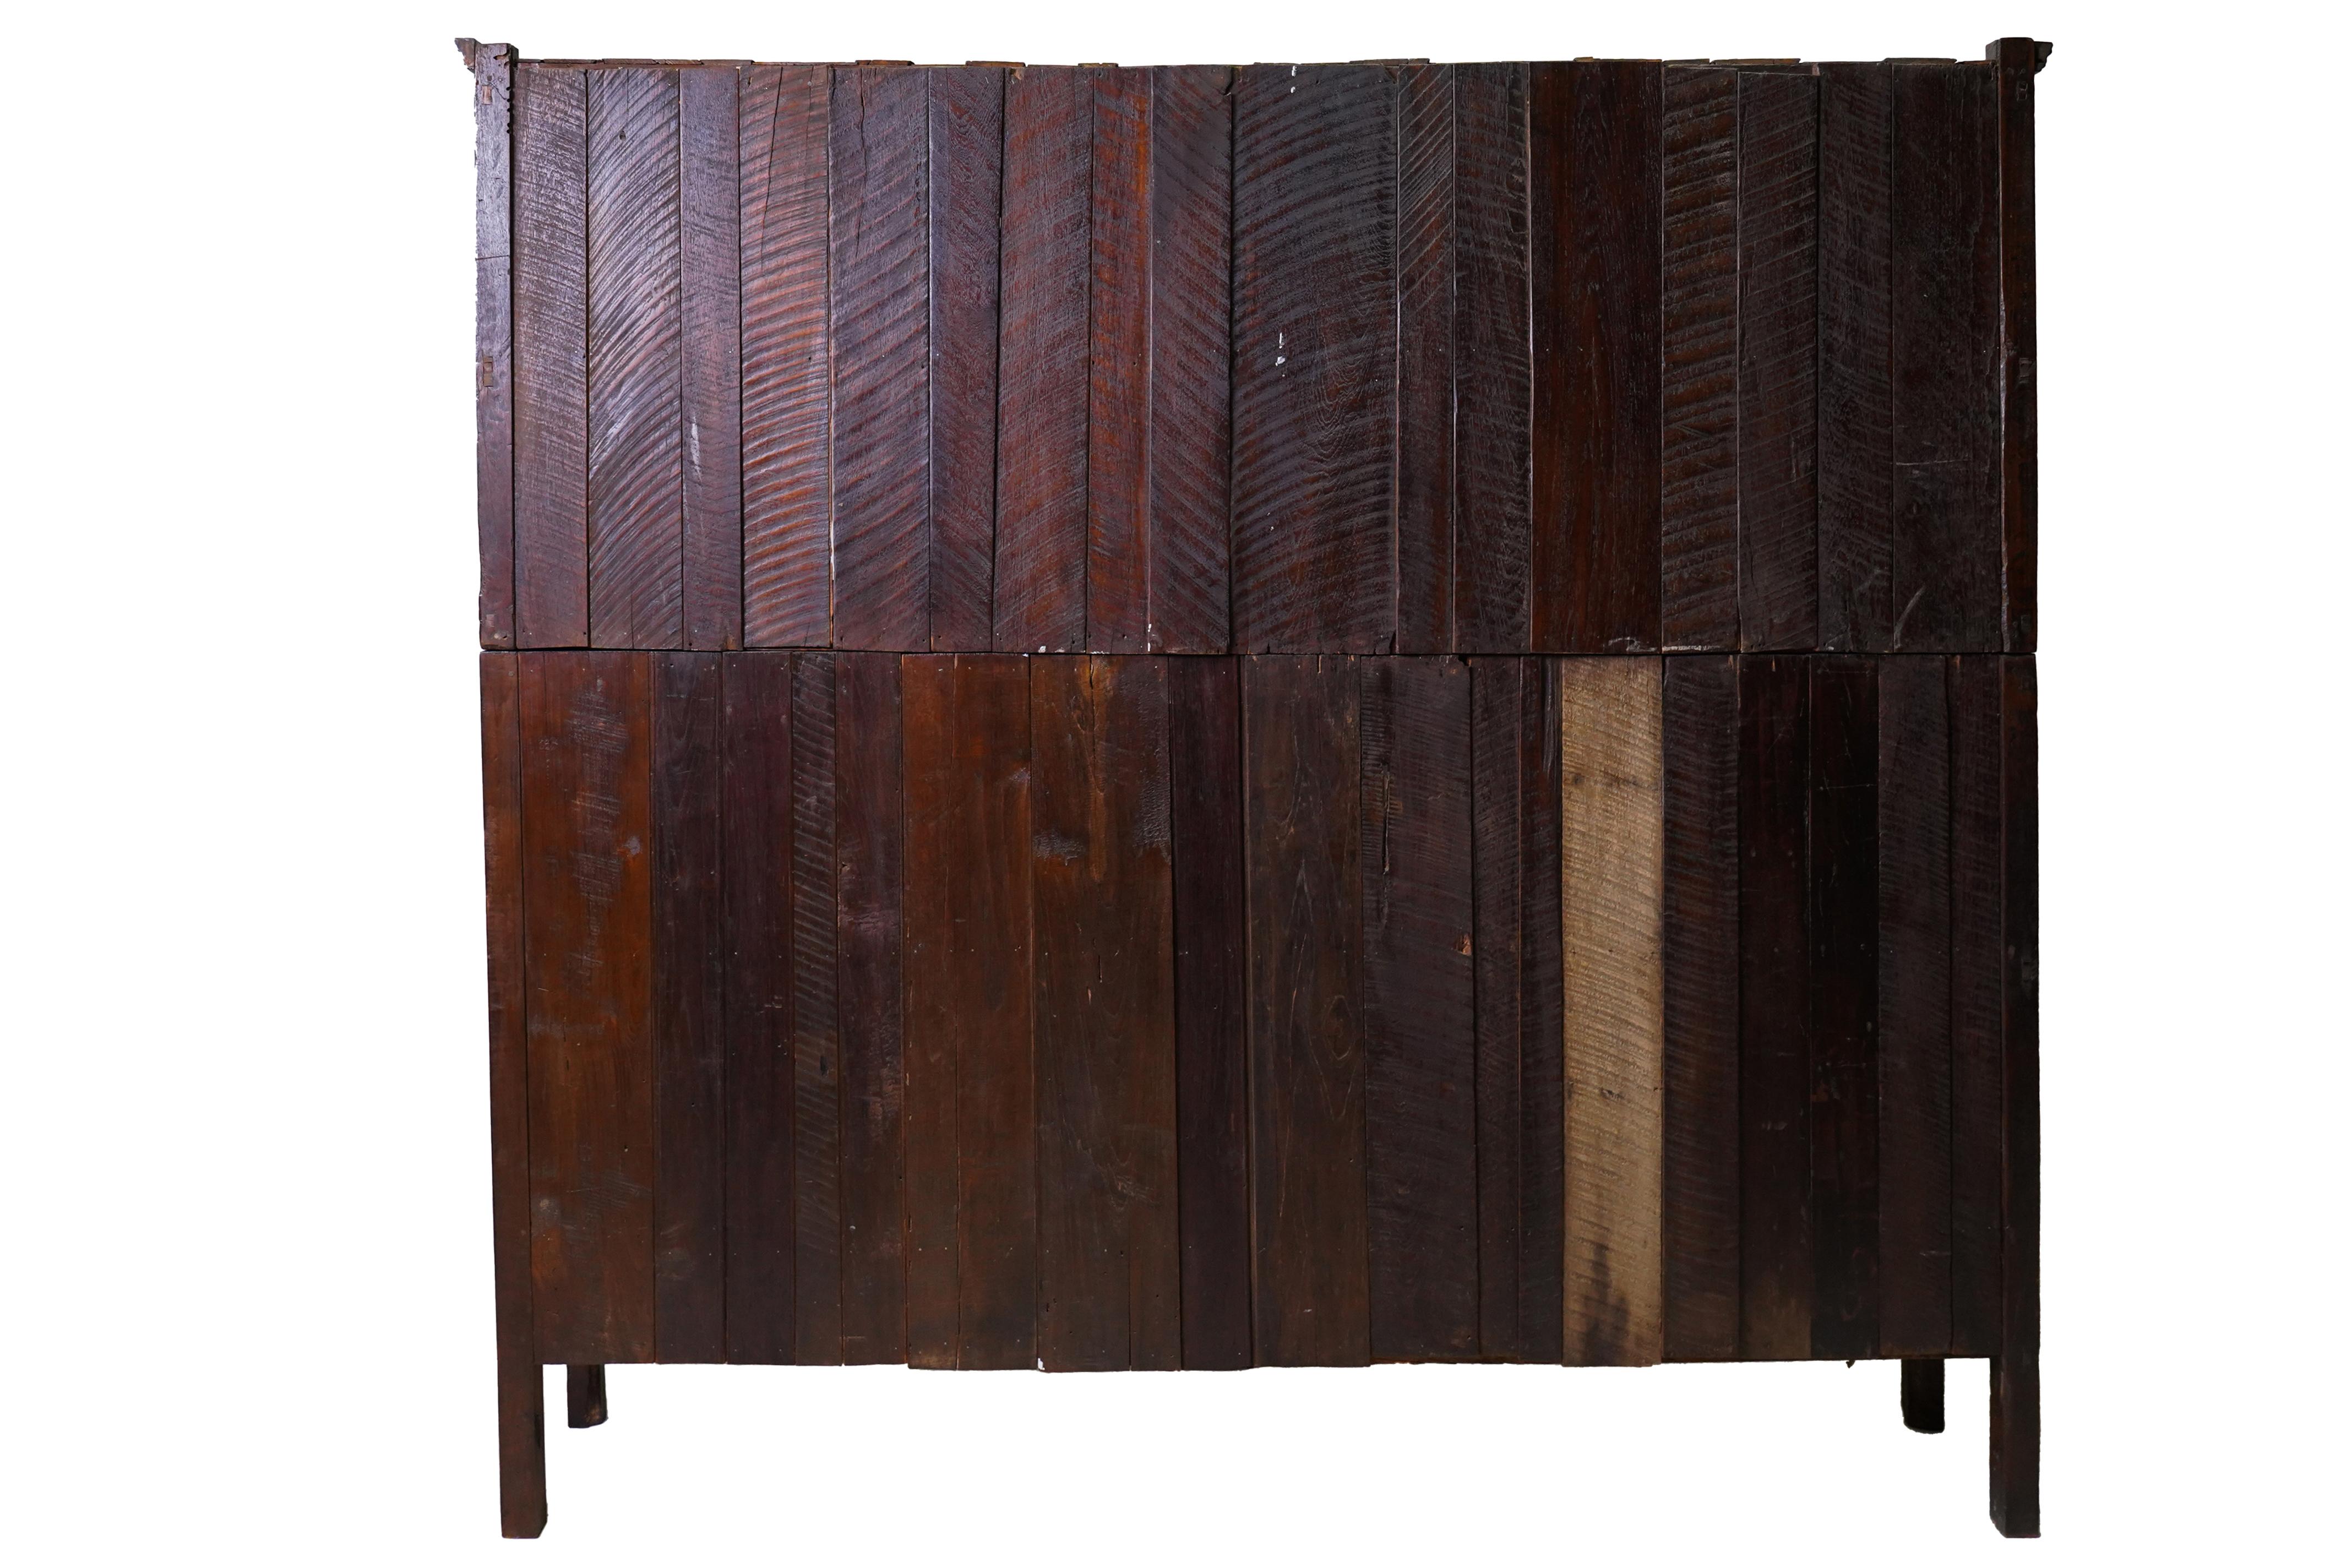 Burmese An Authentic British-Colonial Bookcase Made From Teakwood